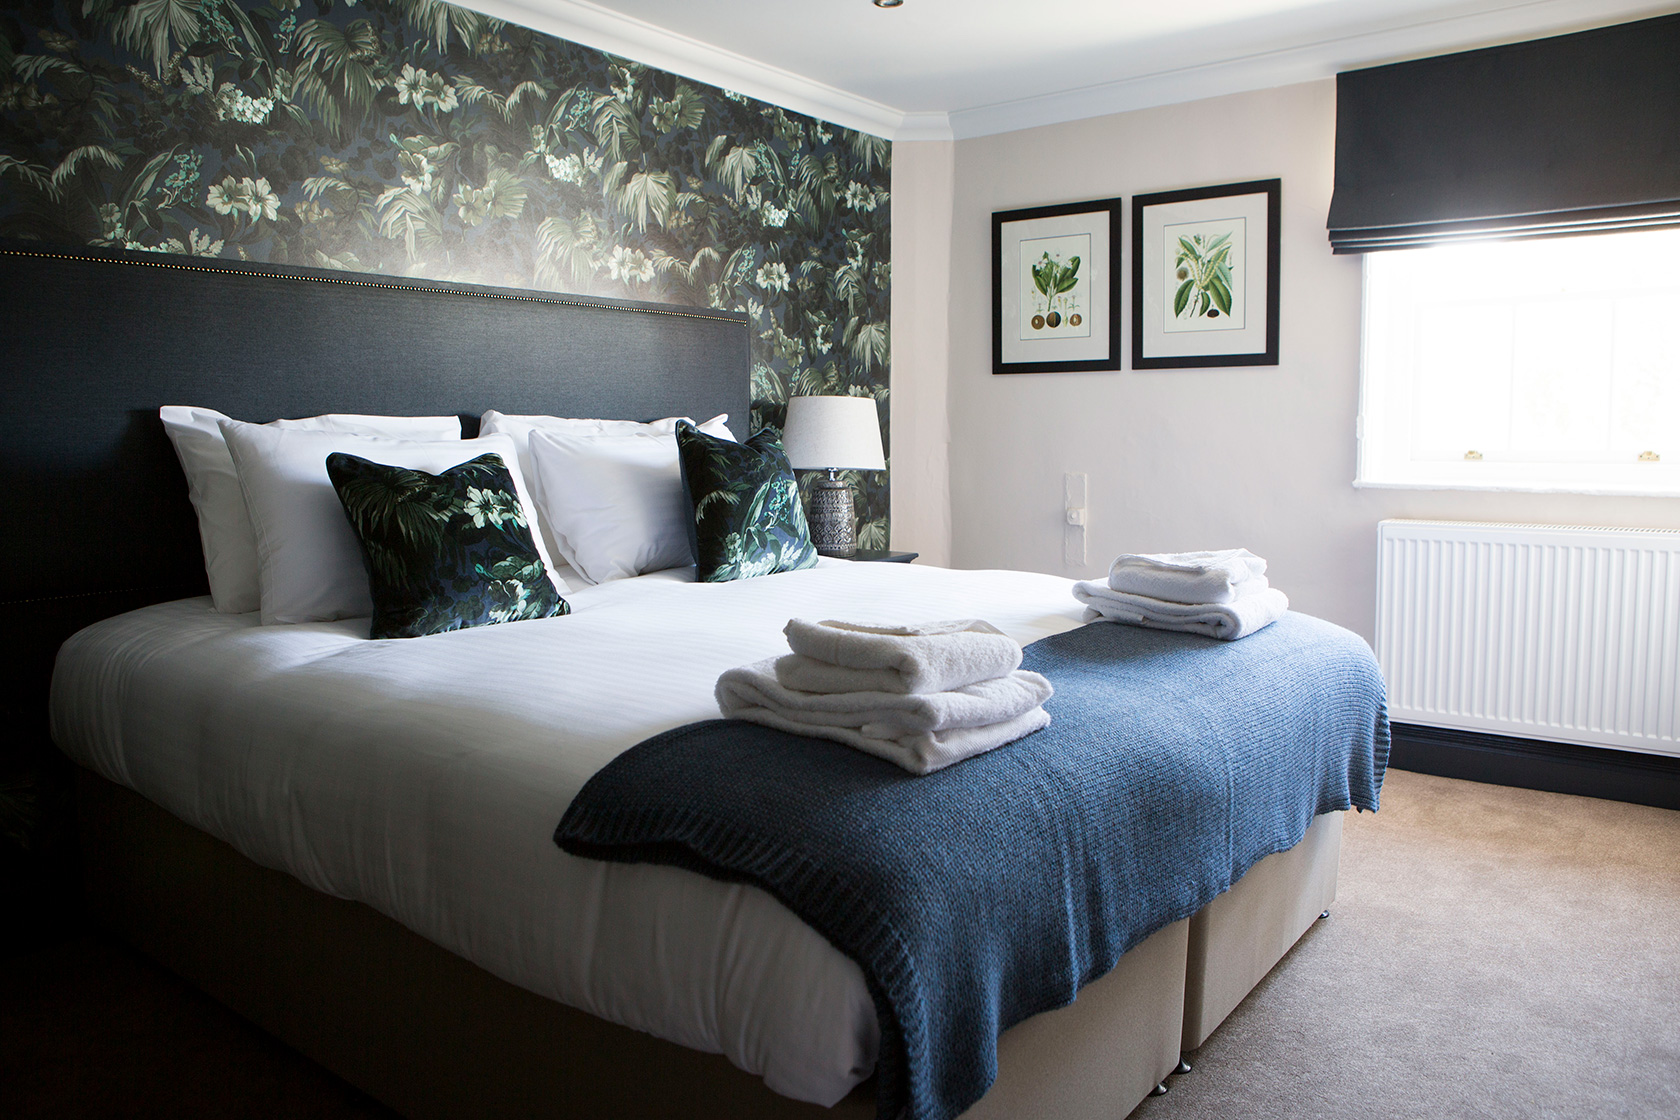 Our family room features a comfy Superking bed which can be turned into a great twin room